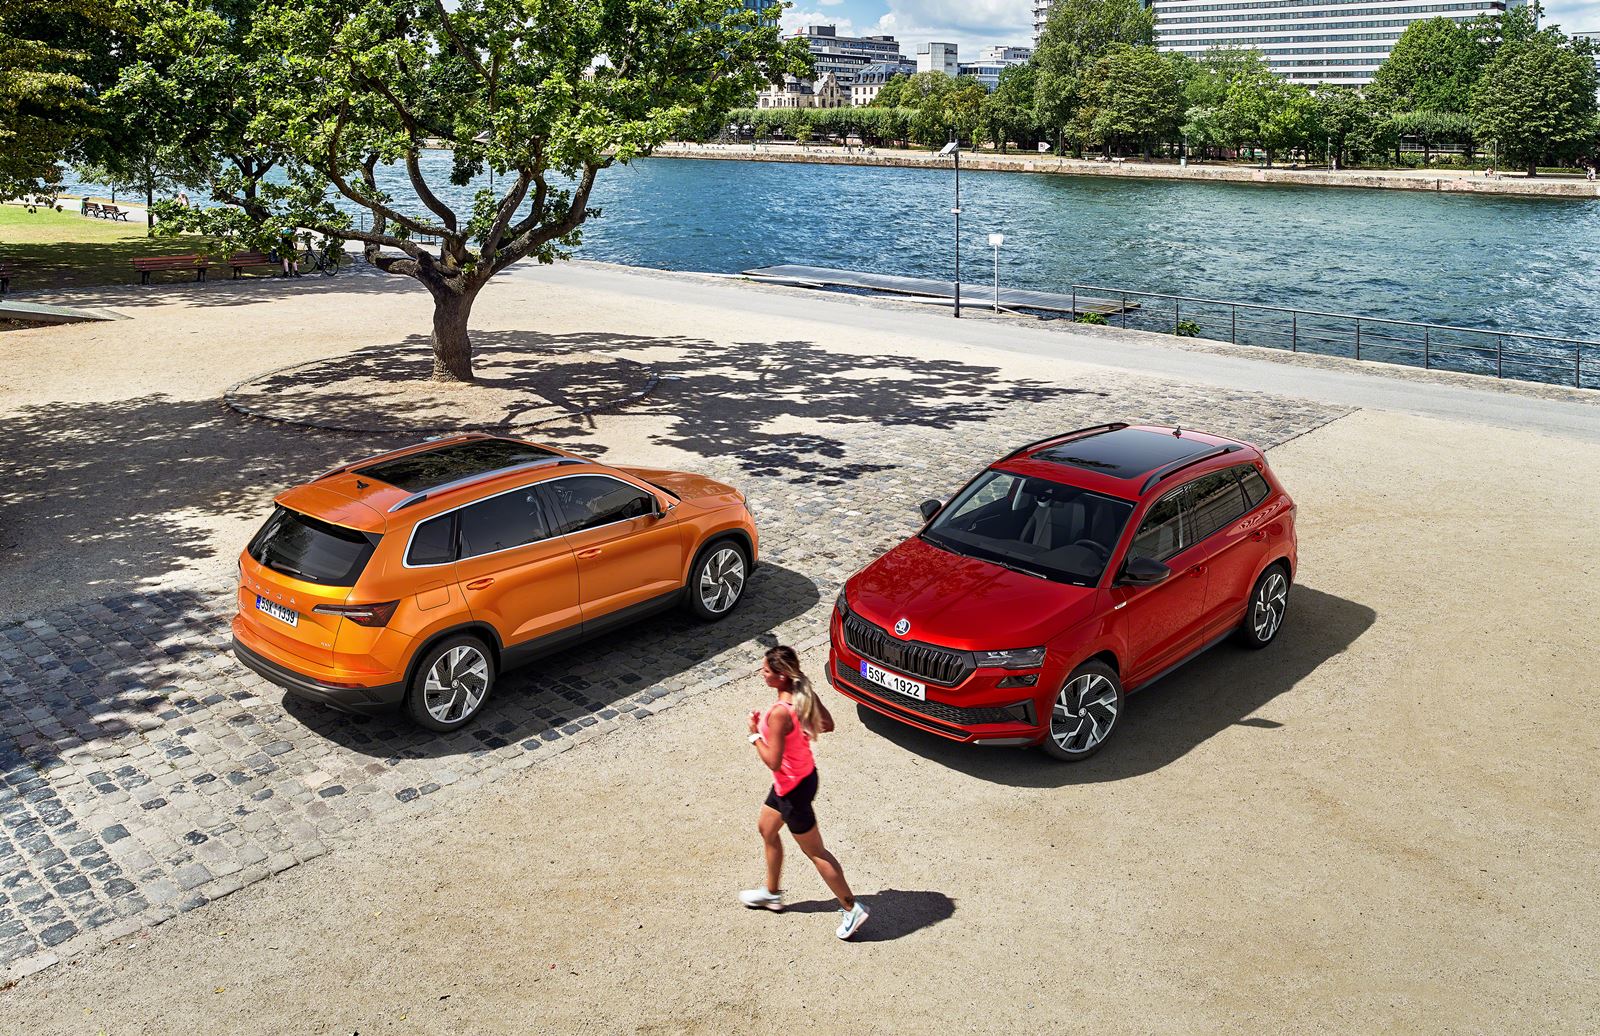 The Skoda Karoq 2022 arrives in Spain: Here are the prices